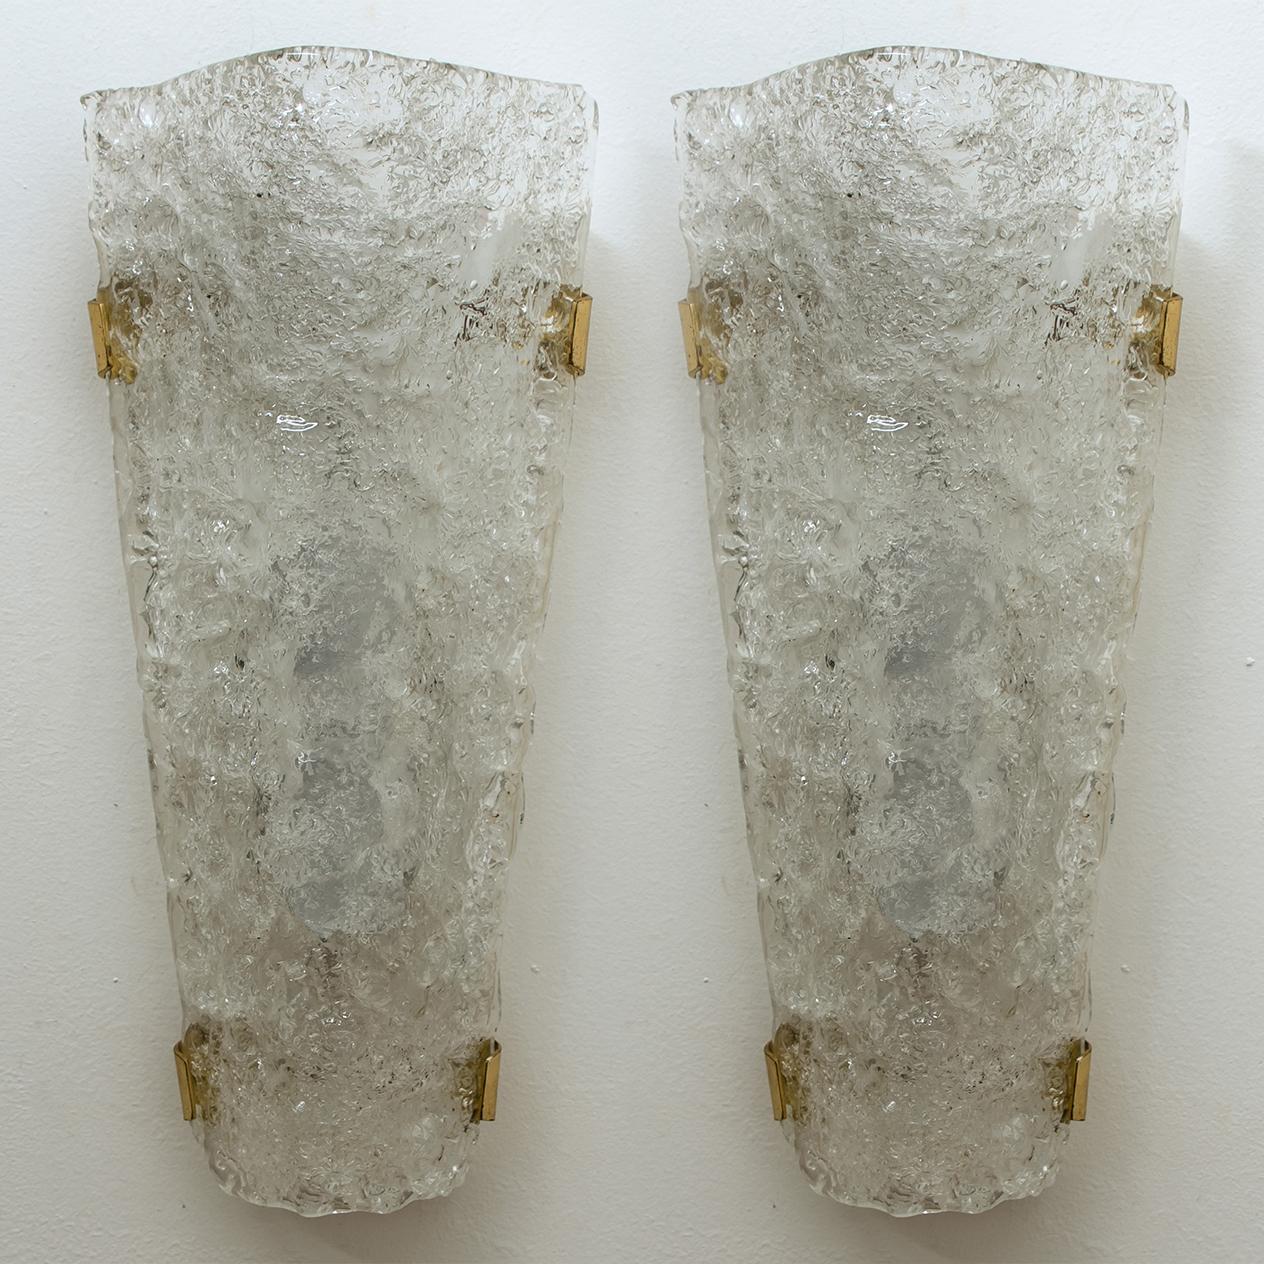 Pair of sconces by Hillebrand. With bubble glass shade, brass details a white backplate and mounting hardware. 

The glass plate is made of tiny glass shards which are molded into the glass during its manufacture giving the piece a heavy ice